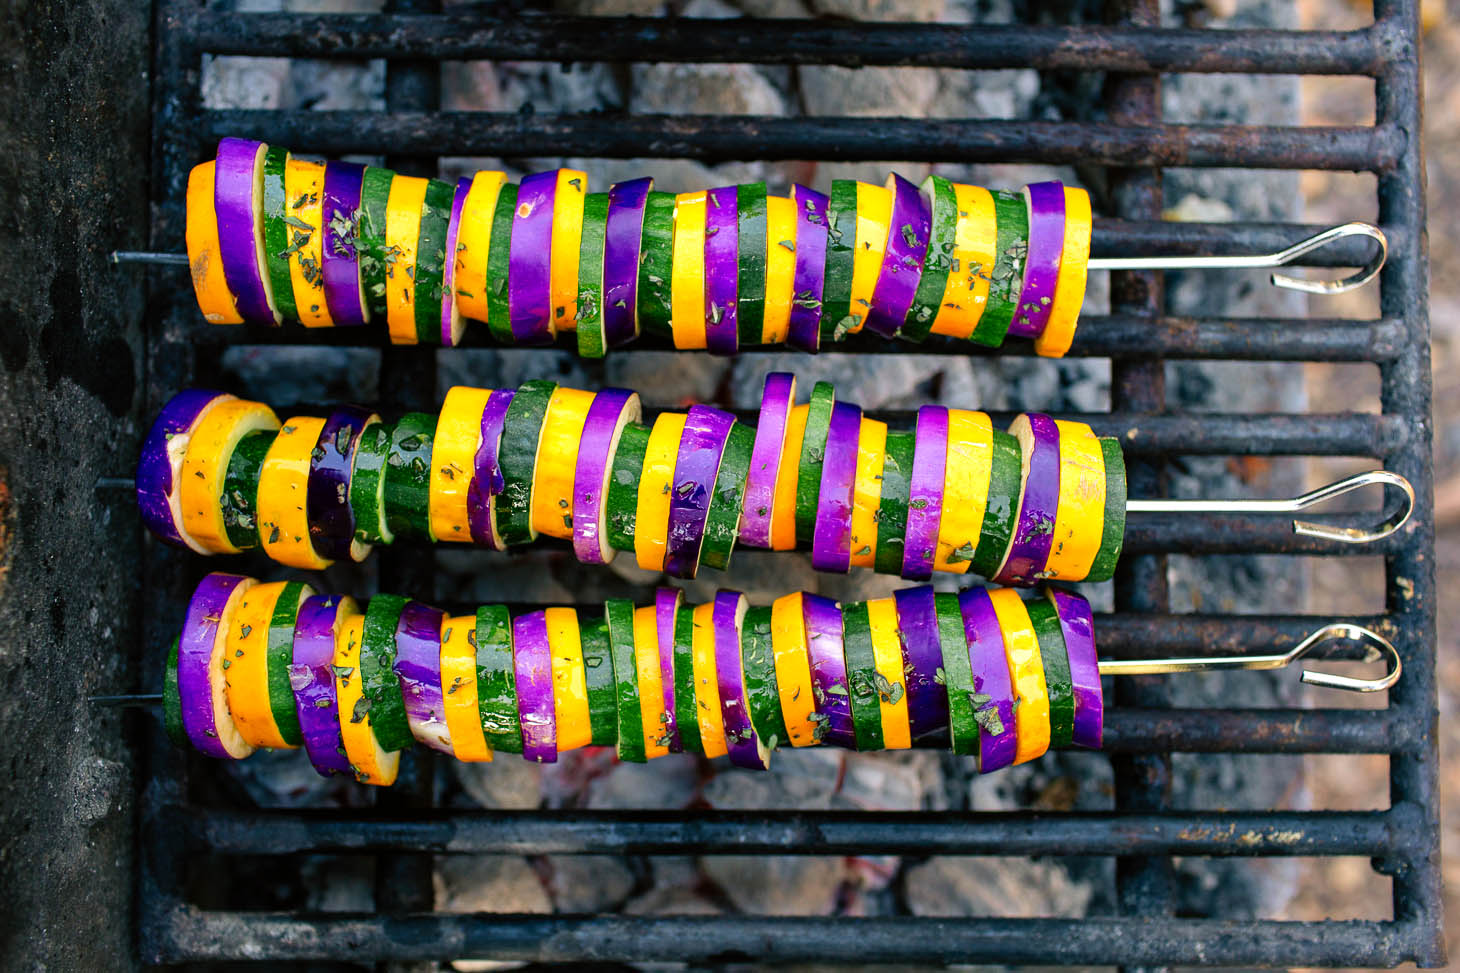 These Ratatouille grilled vegetable kabobs is a healthy summer grilling recipe perfect for camping trips or backyard BBQs. Plus it's vegetarian + vegan!